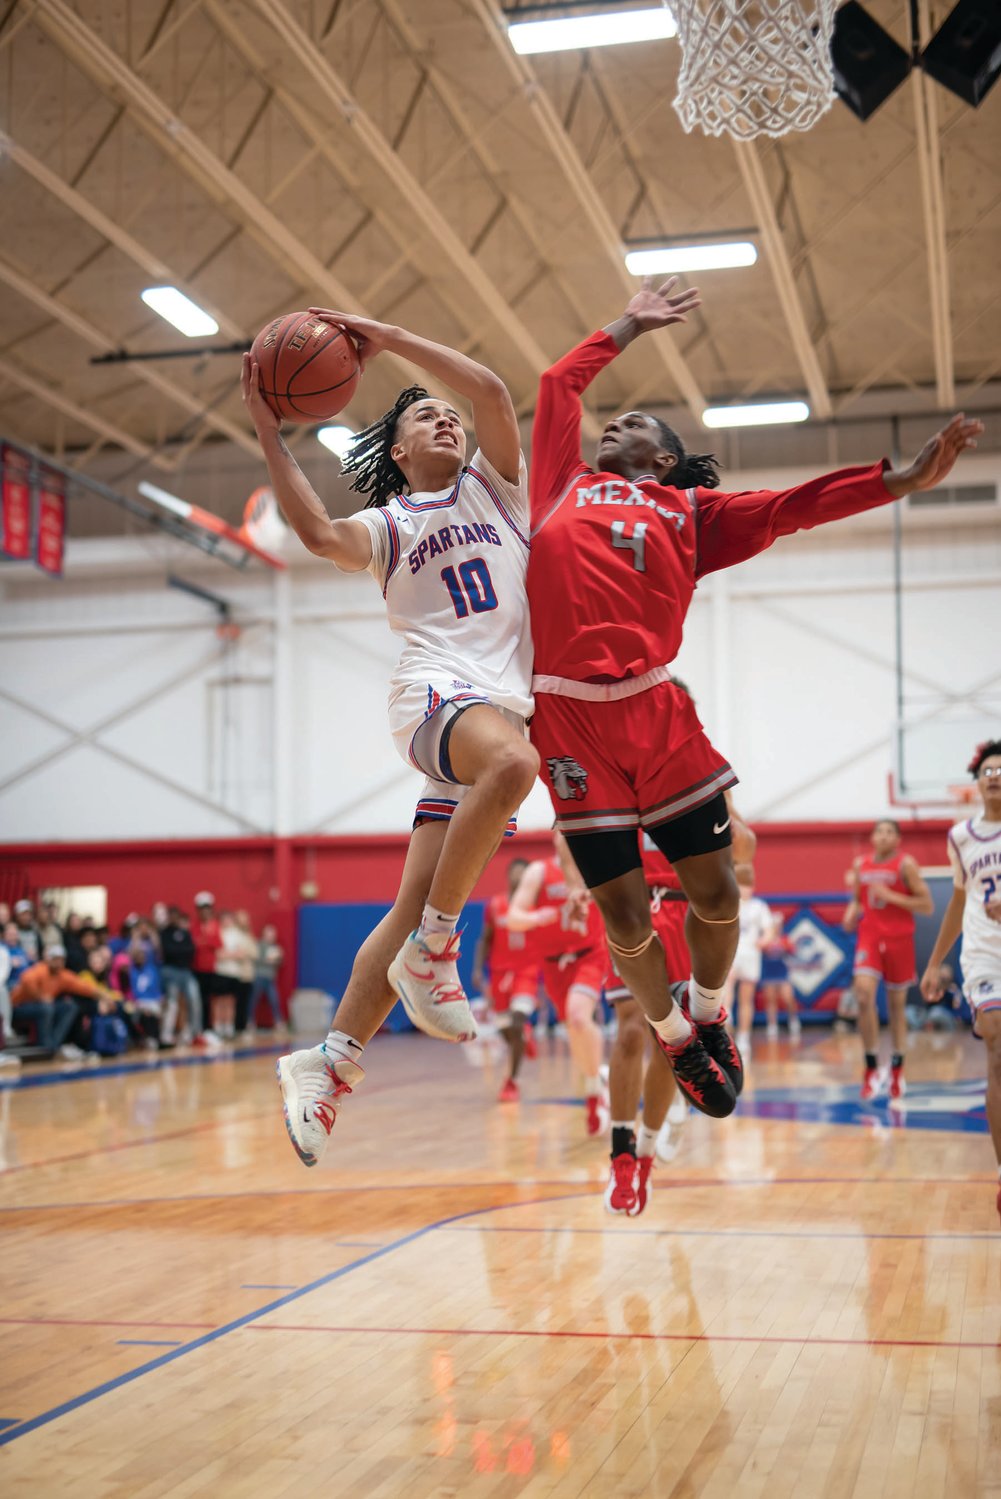 Moberly senior Jaisten Payne (10) has a layup contested by Mexico’s Jordan Shelton in last Thursday’s contest. Payne had a game-high 29 points in the 65-48 loss to the undefeated Bulldogs. (John Wright Photography)